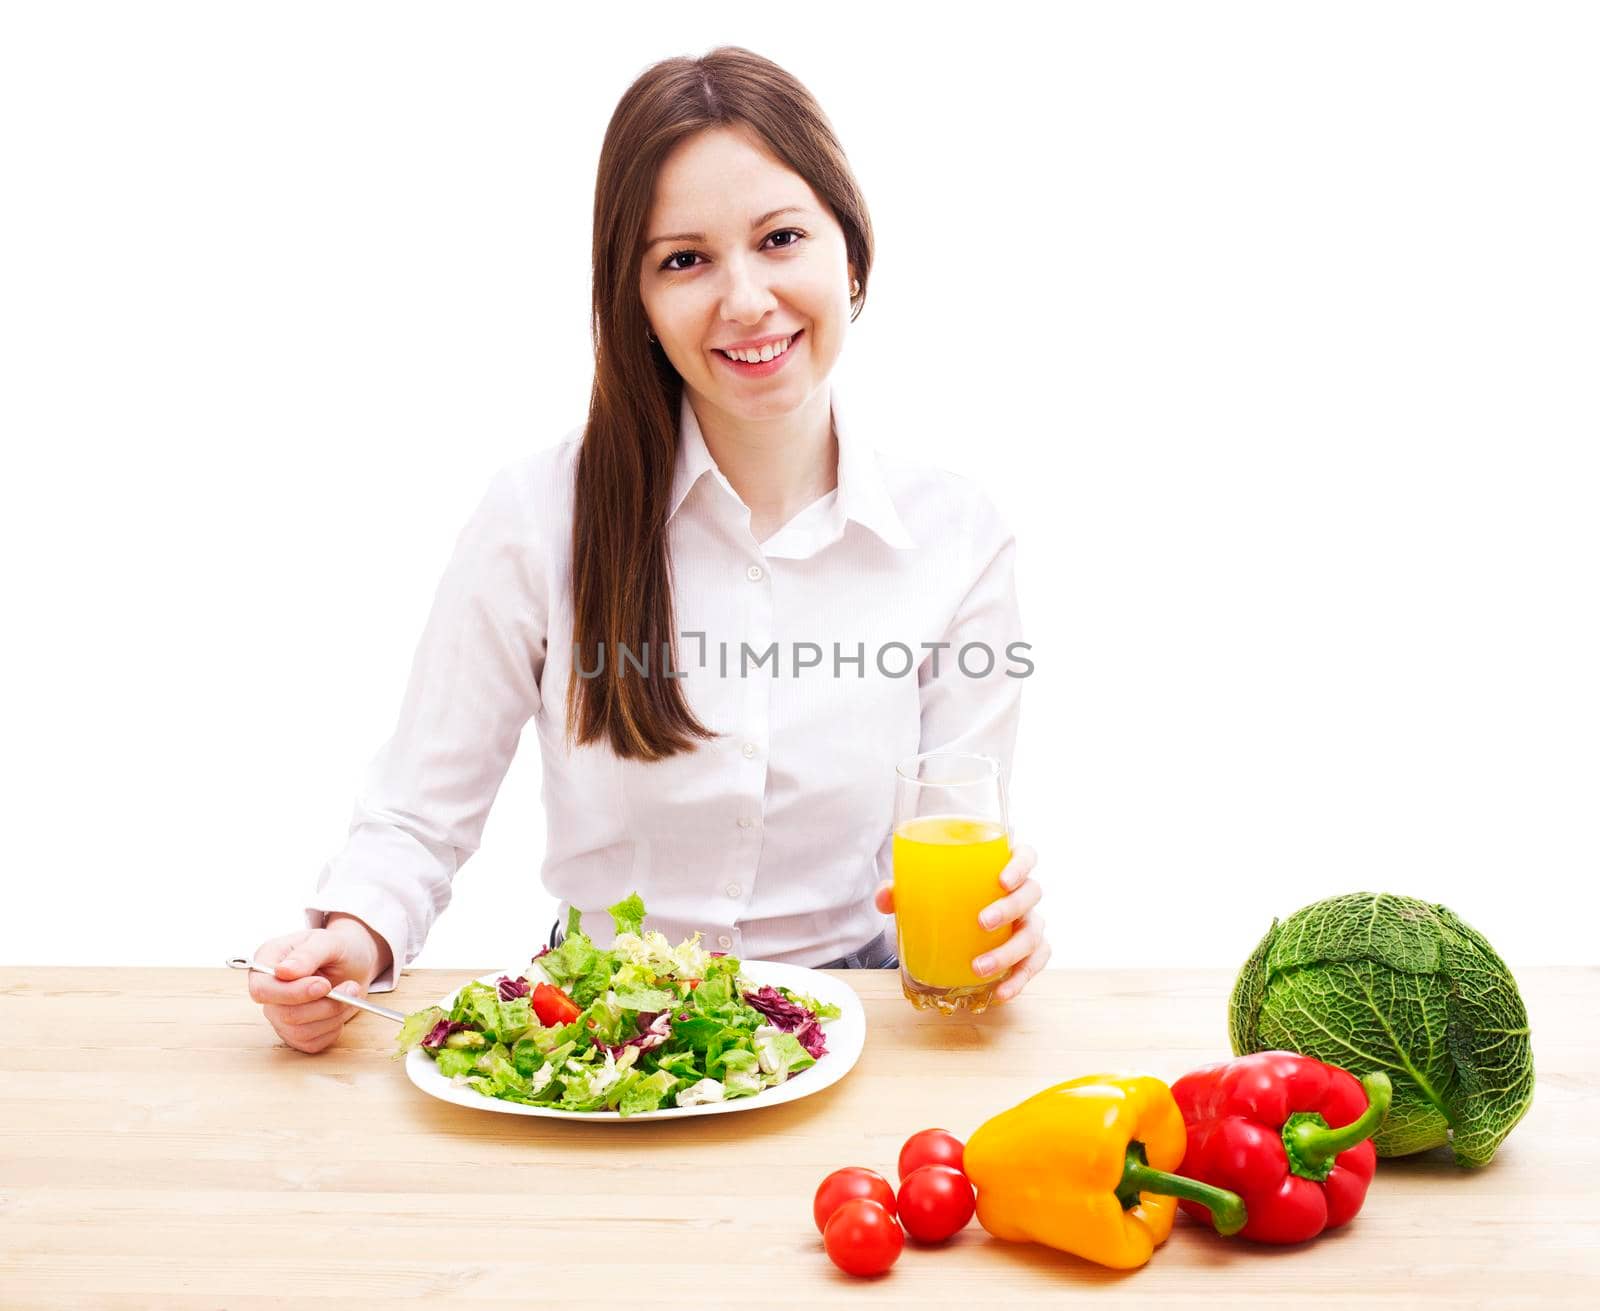 Woman with plate of salad, orange juice and vegetables, isolated on white.